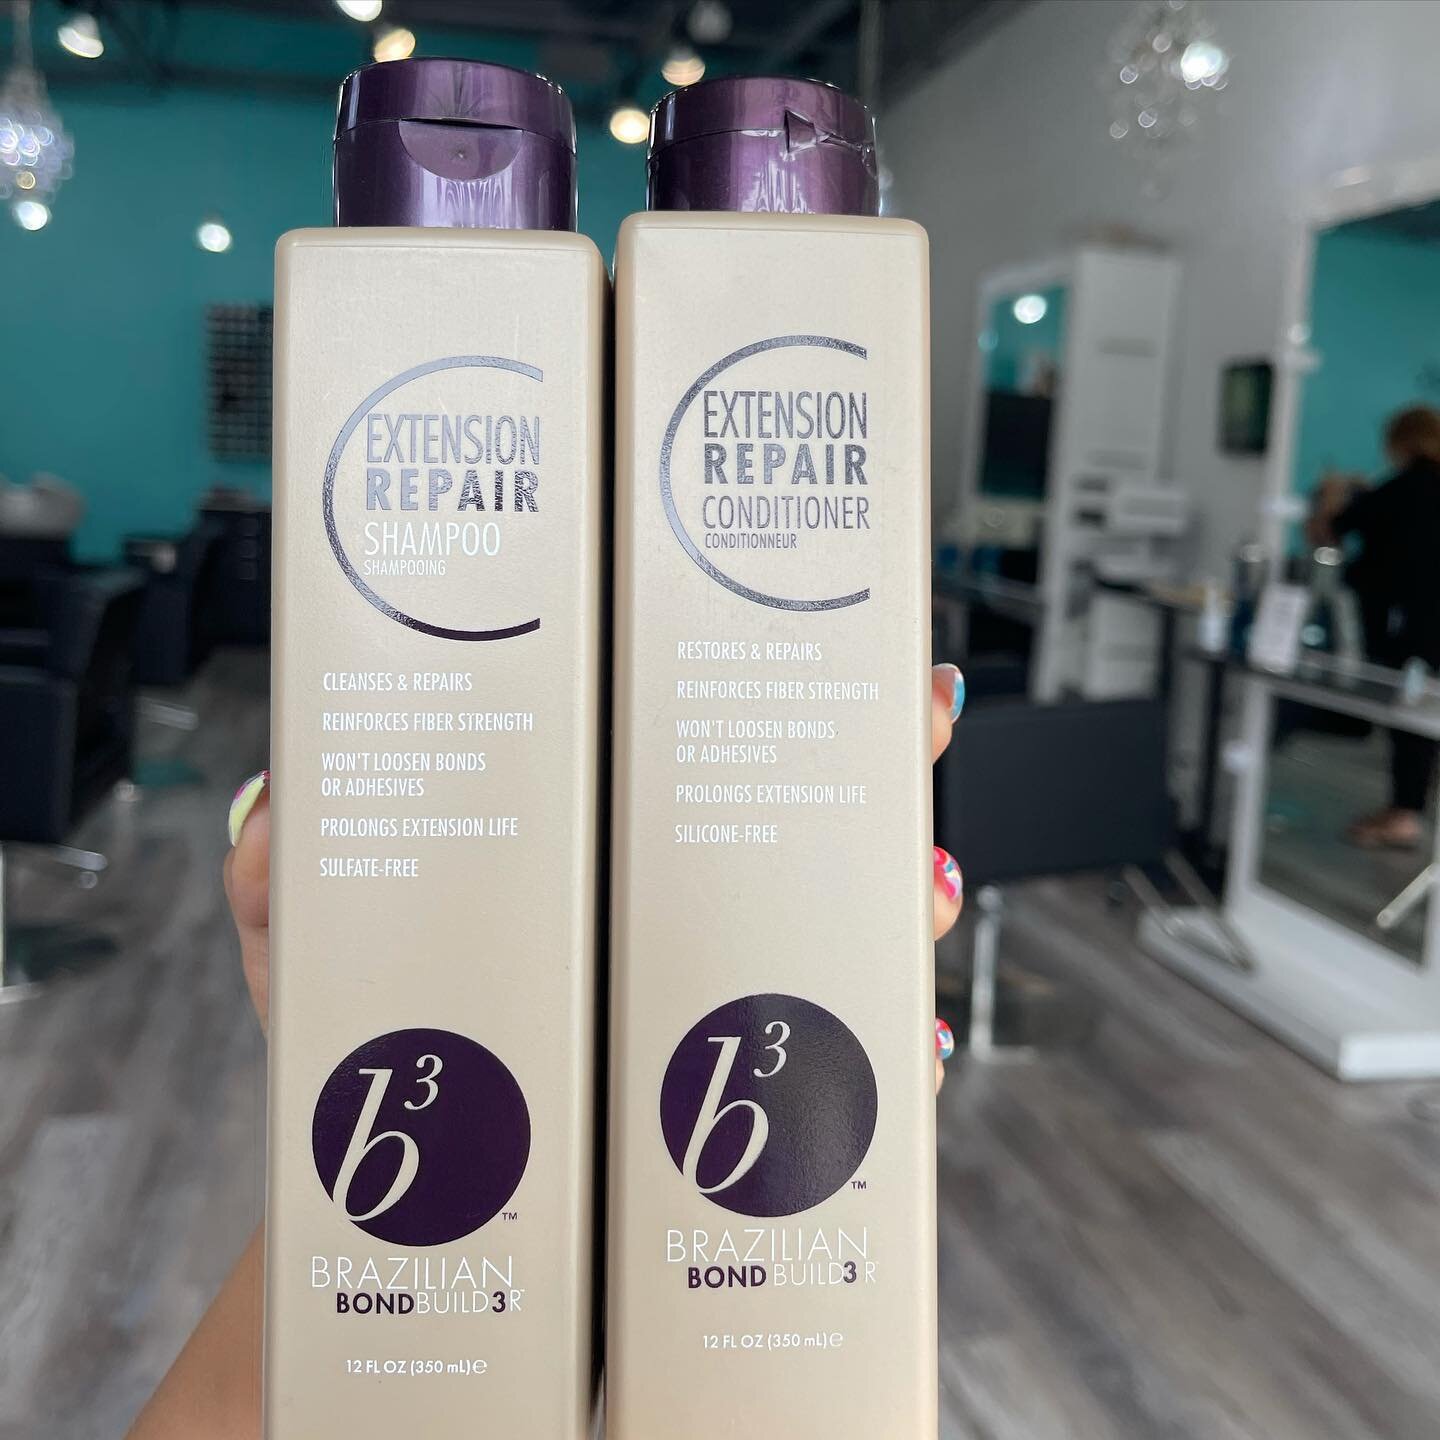 For our extension girlies✨😉 

Taking proper care of your extensions is SO important! But don&rsquo;t worry, We got you! 
Come in and grab these @brazilianbondbuilder extension repair shampoo and conditioner! Perfect for cleansing and repairing those